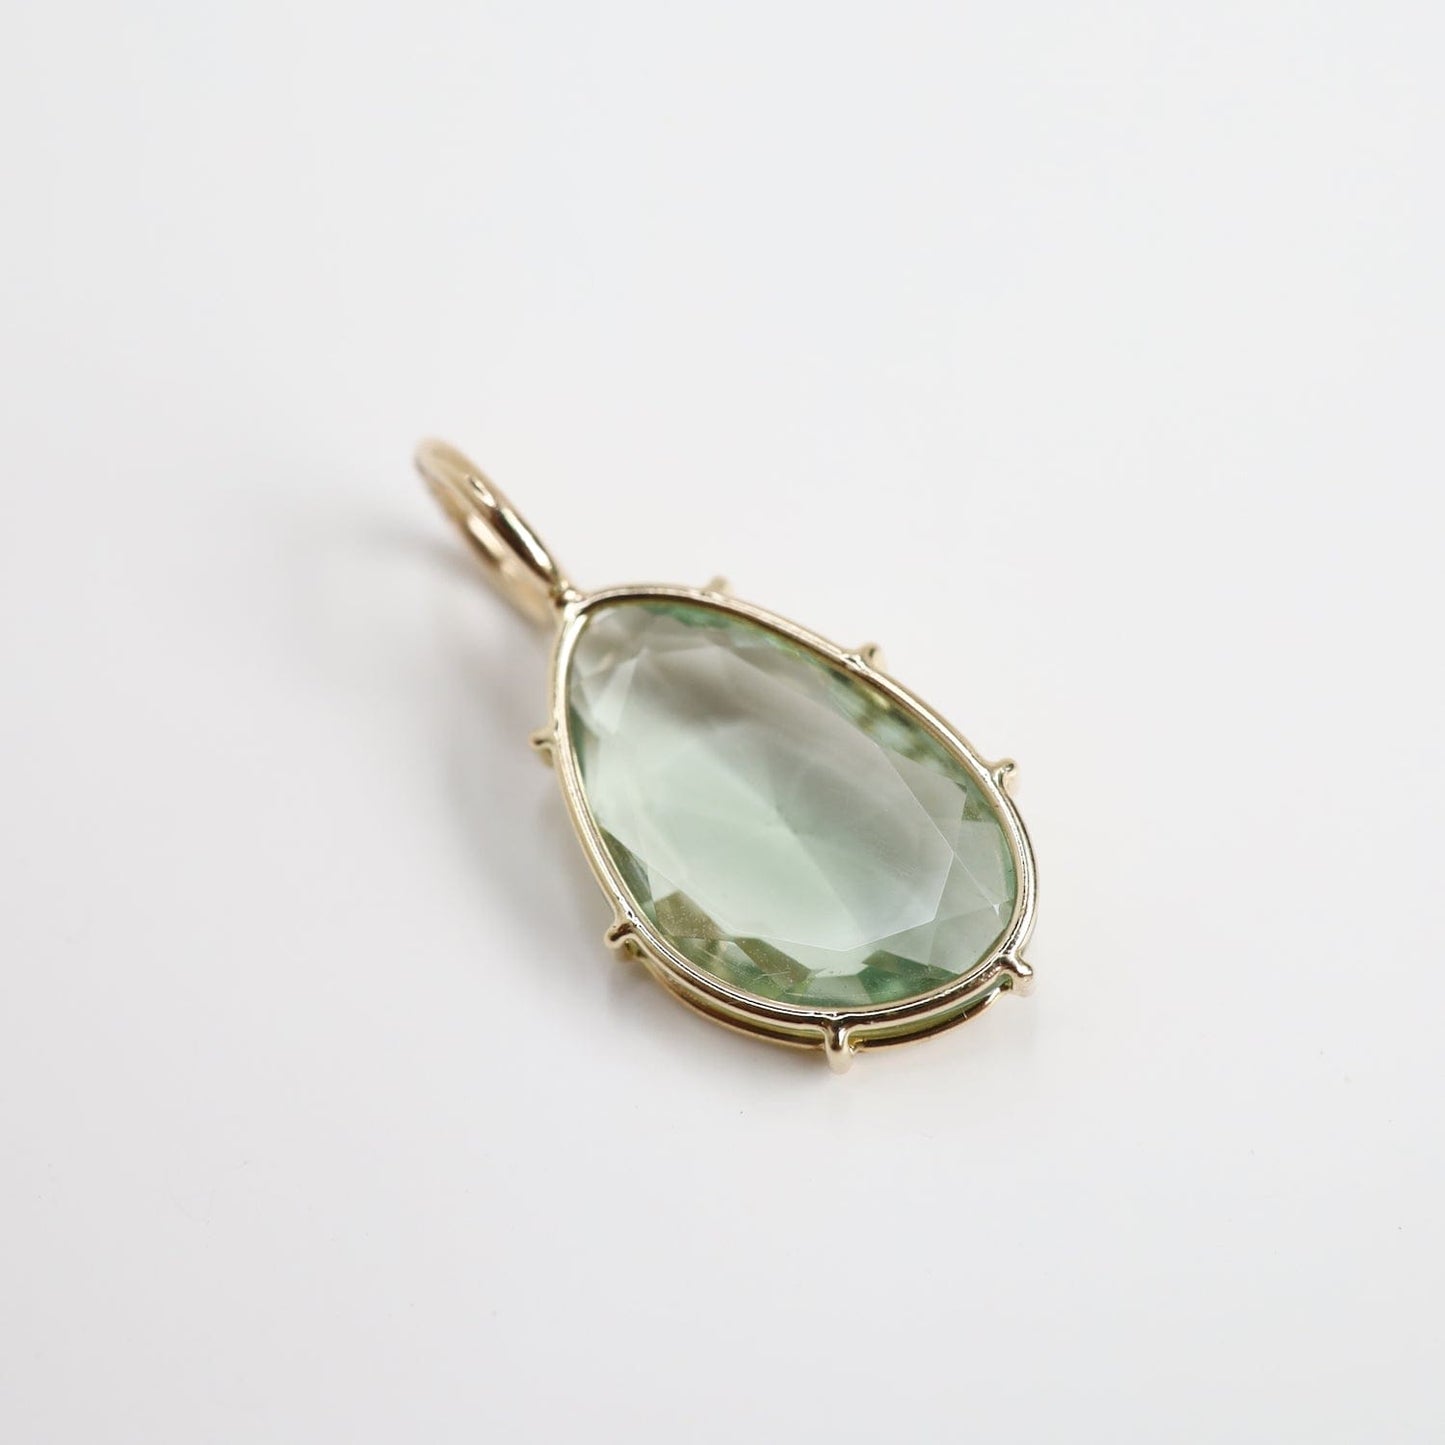 CHM One of a Kind Green Amethyst Harriet Stone Charm